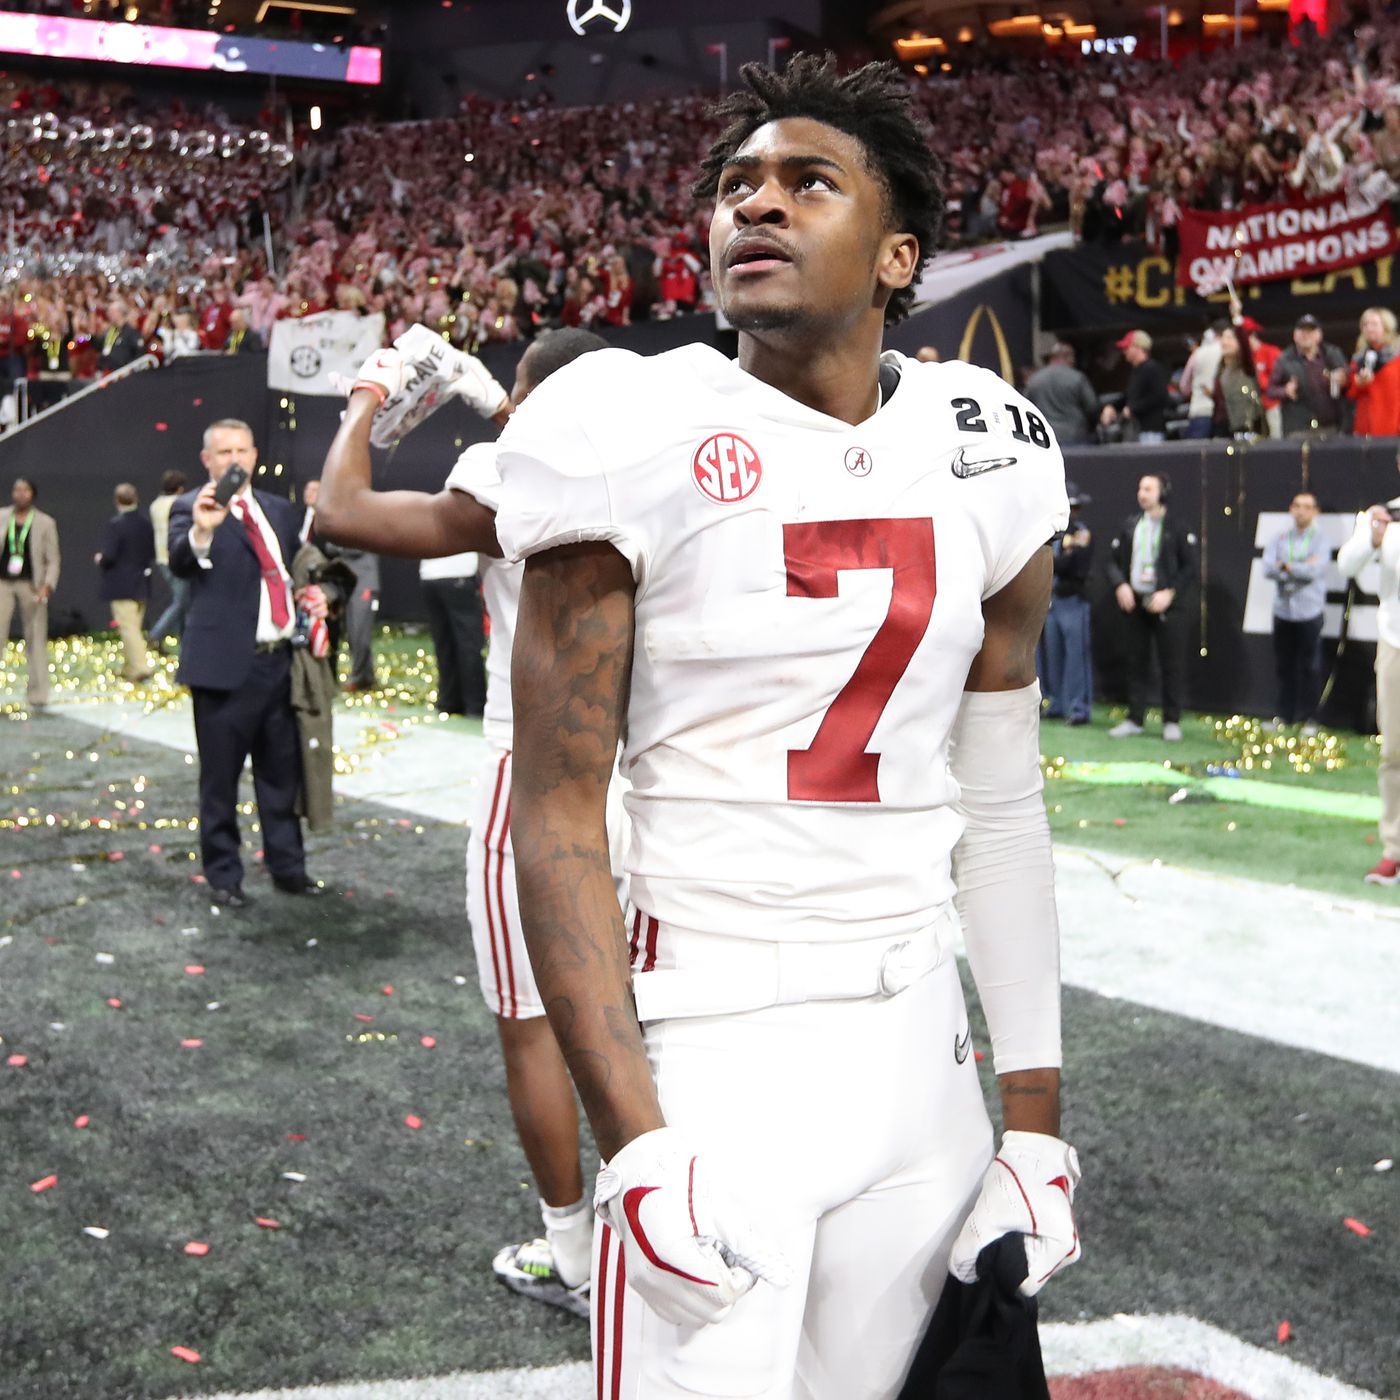 Trevon Diggs has broken foot, out indefinitely 'Bama Roll